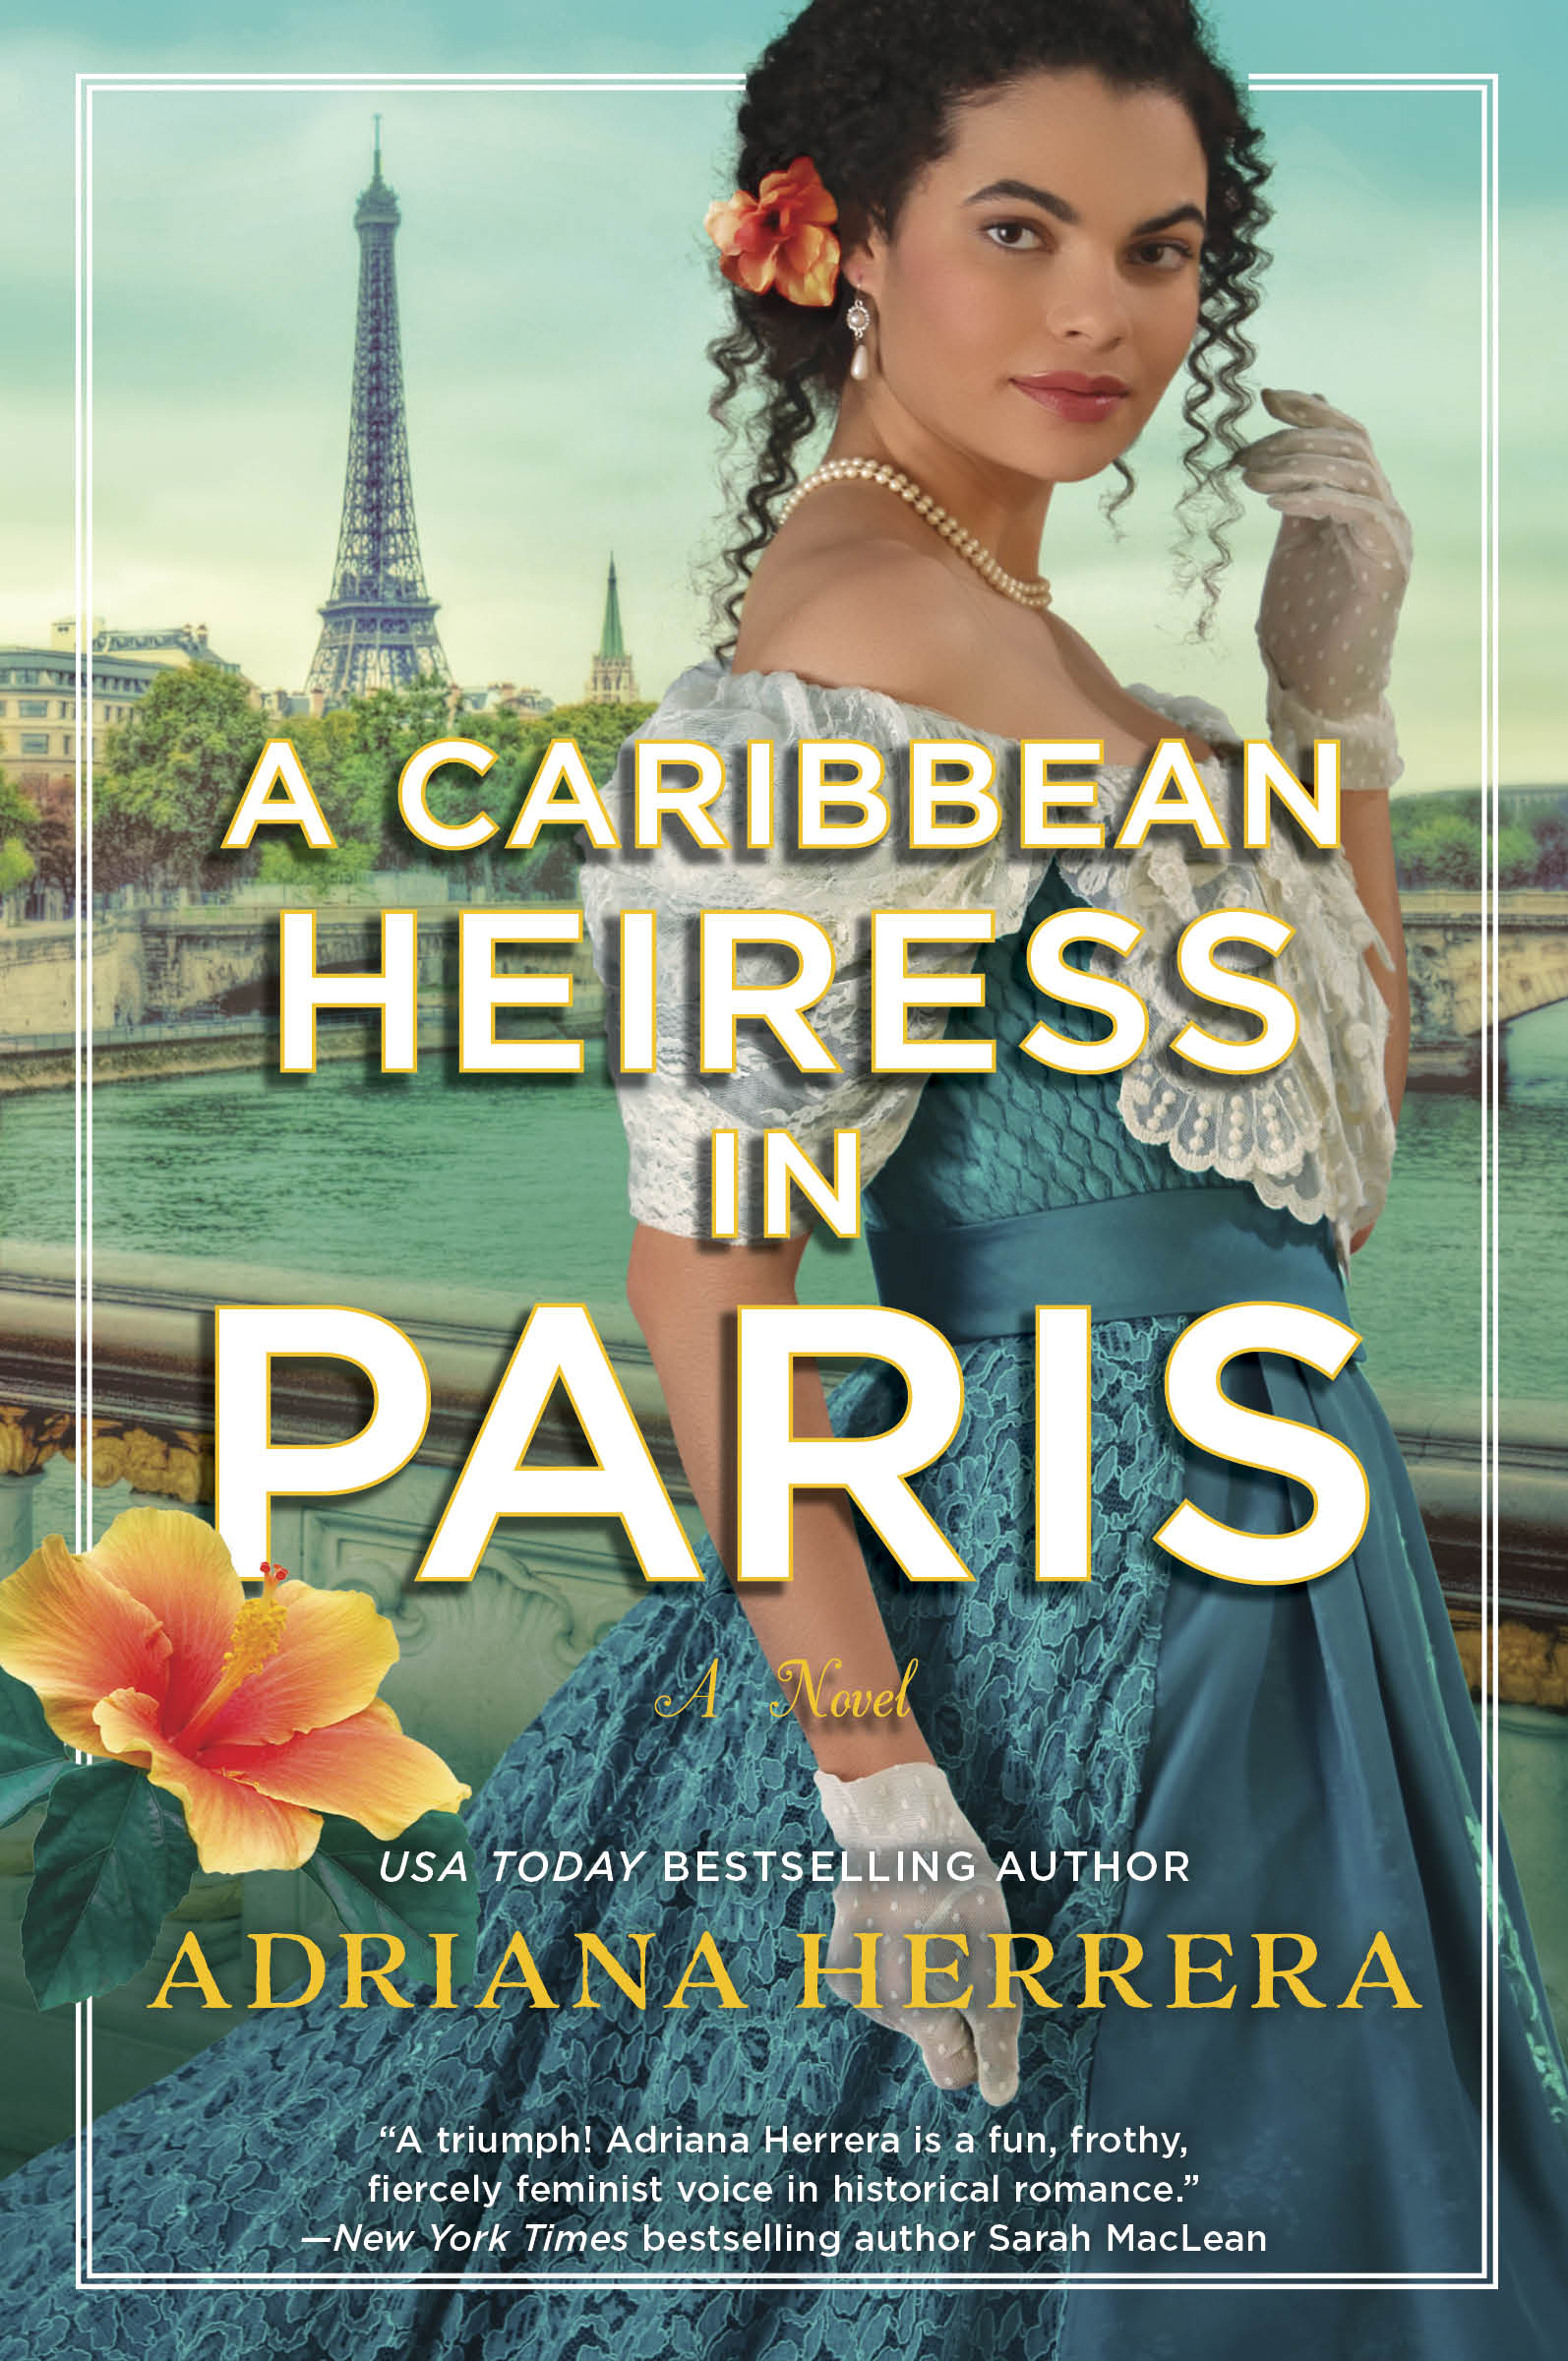 cover image of novel A Caribbean Heiress in Paris by author Adriana Herrera